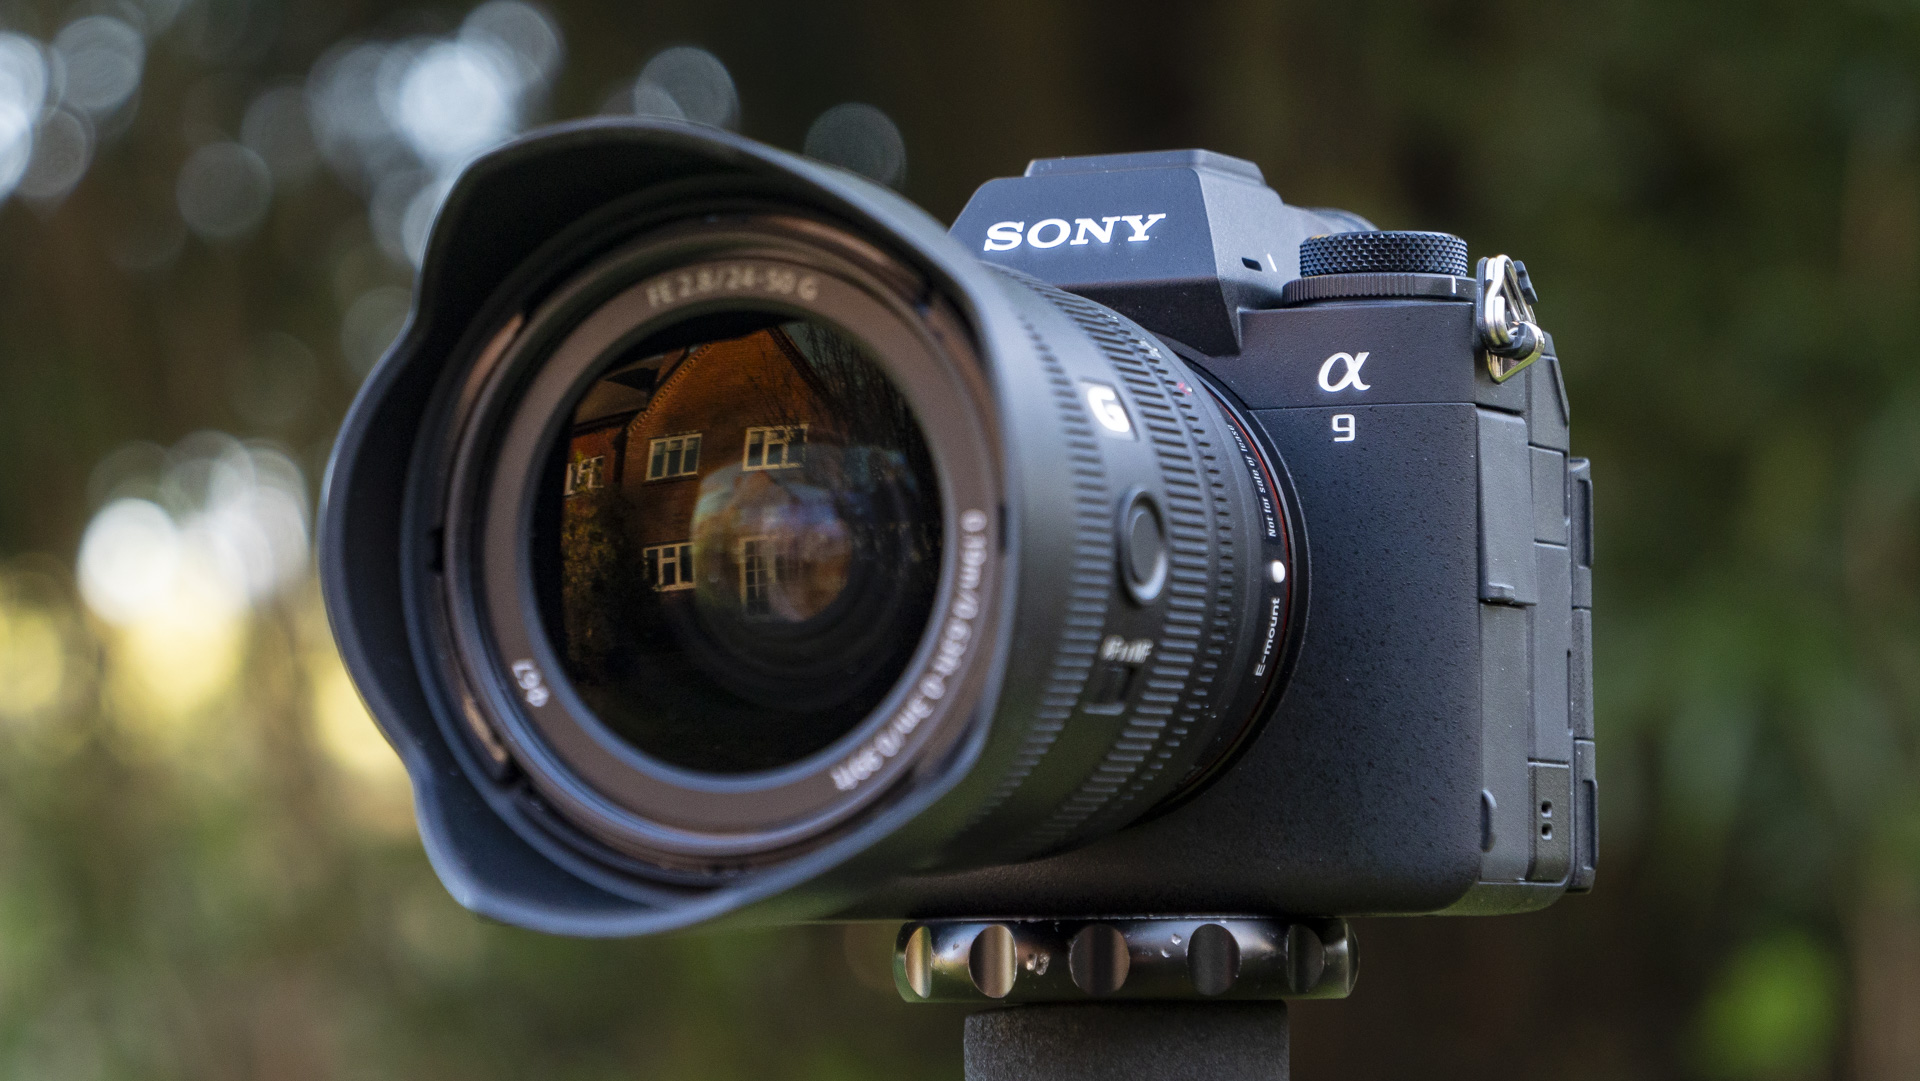 Sony A9 III camera outside with 24-50mm lens attached